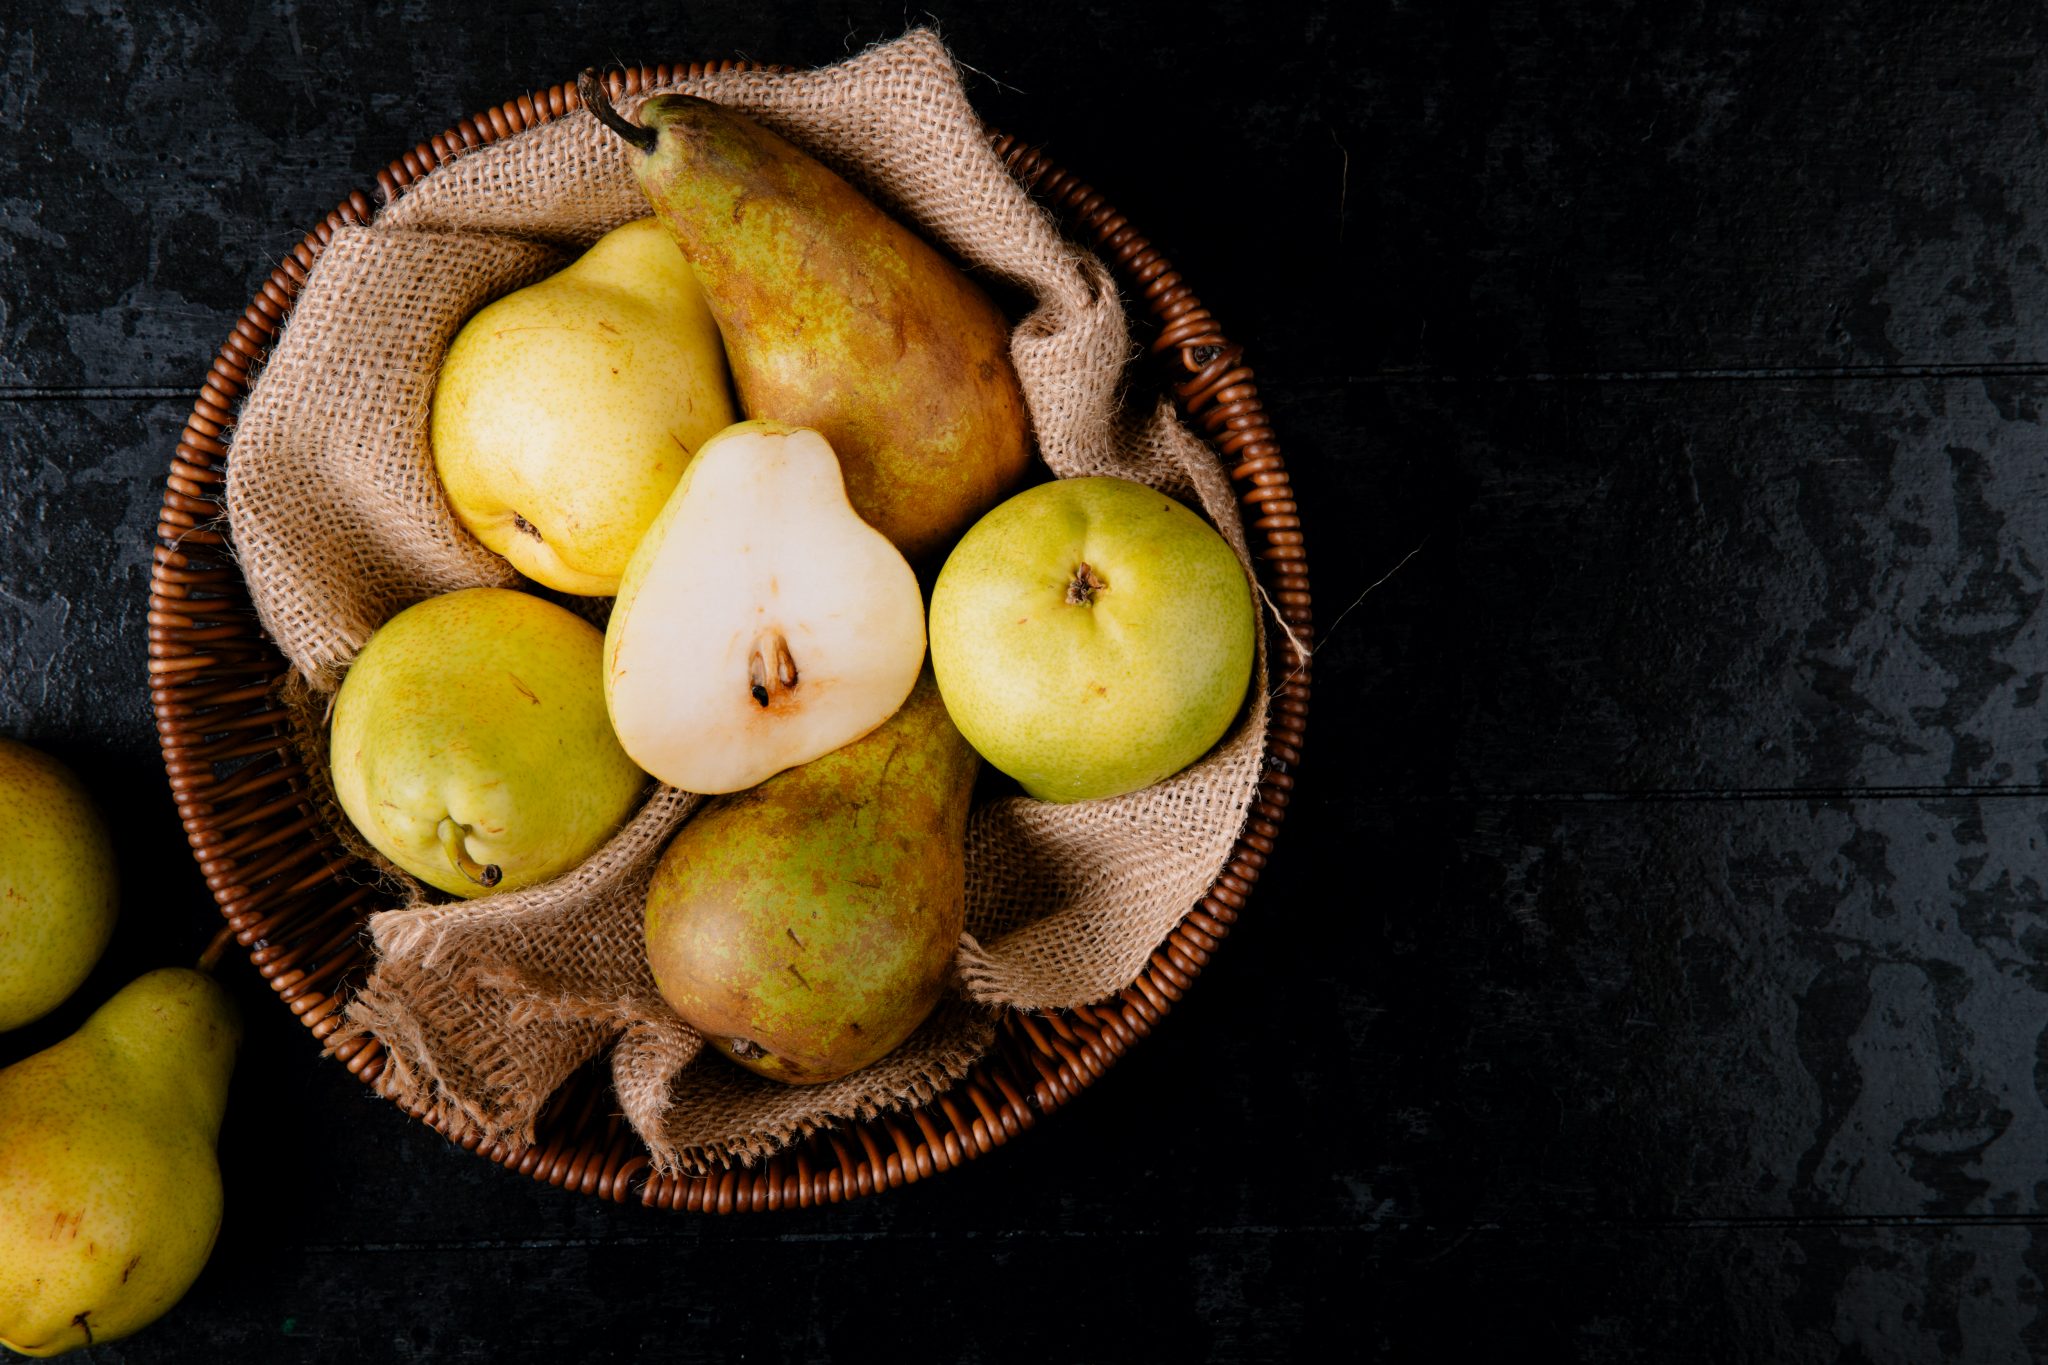 Benefits of eating pears - Dr. Pingel